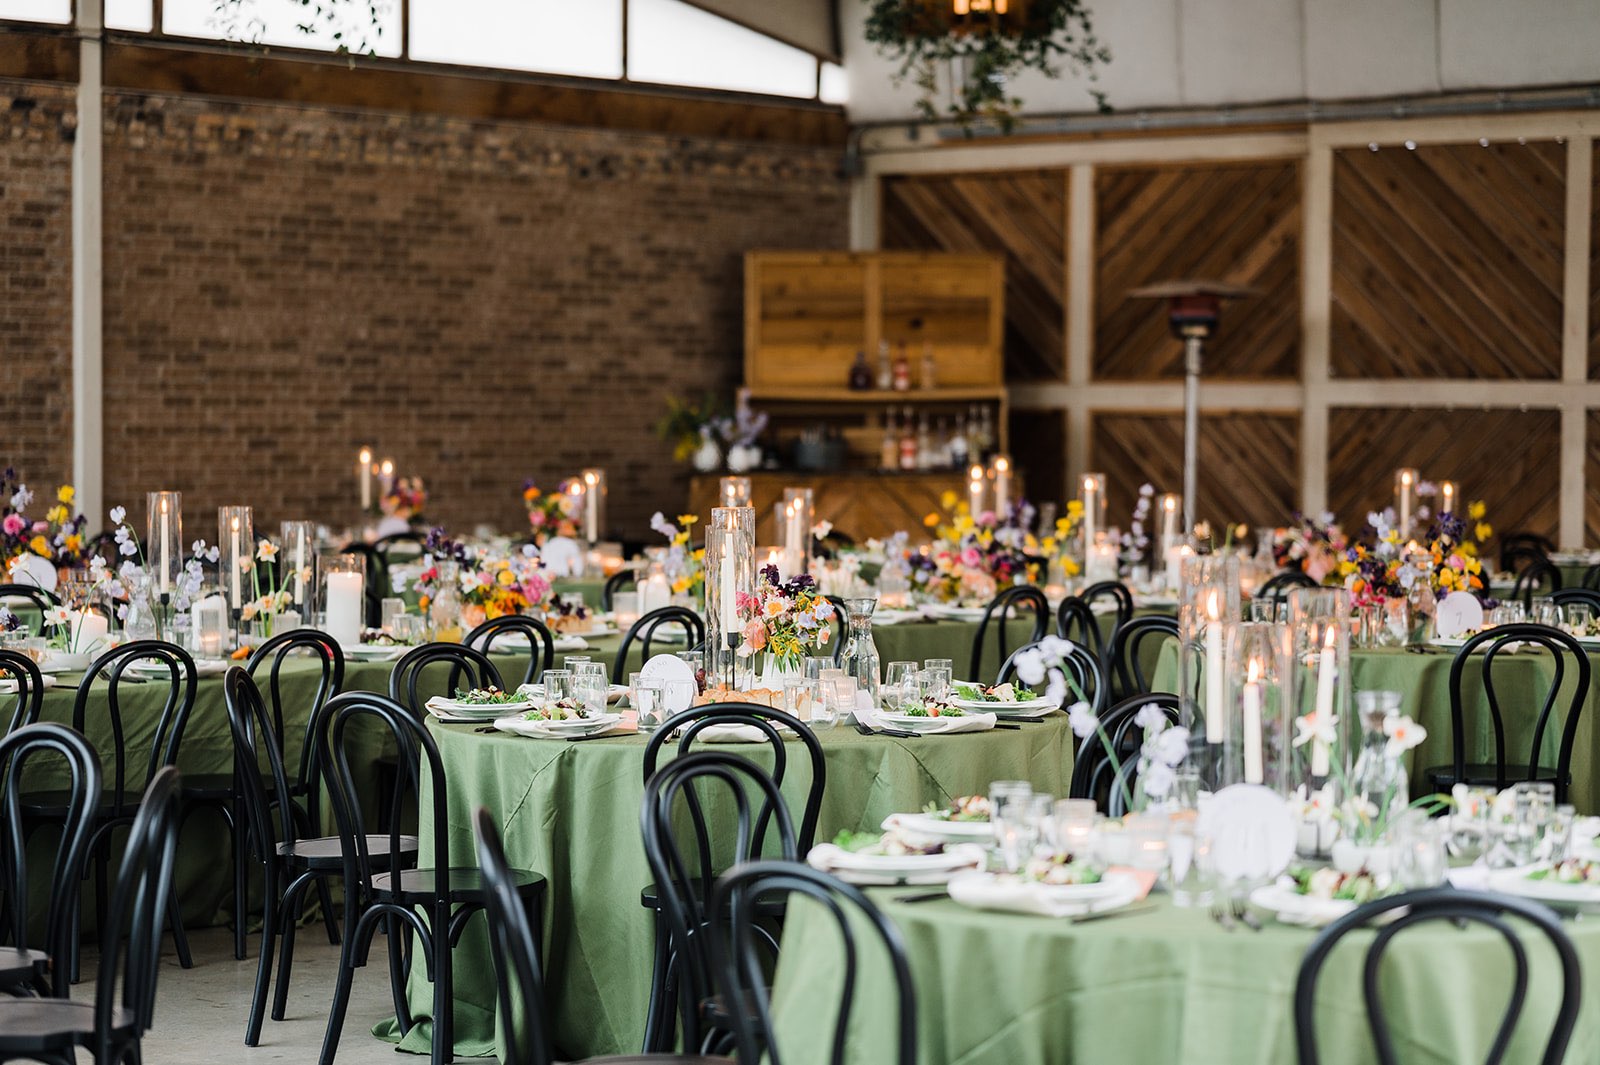 Colorful wedding reception with bold green linens and pink, orange and purple flowers